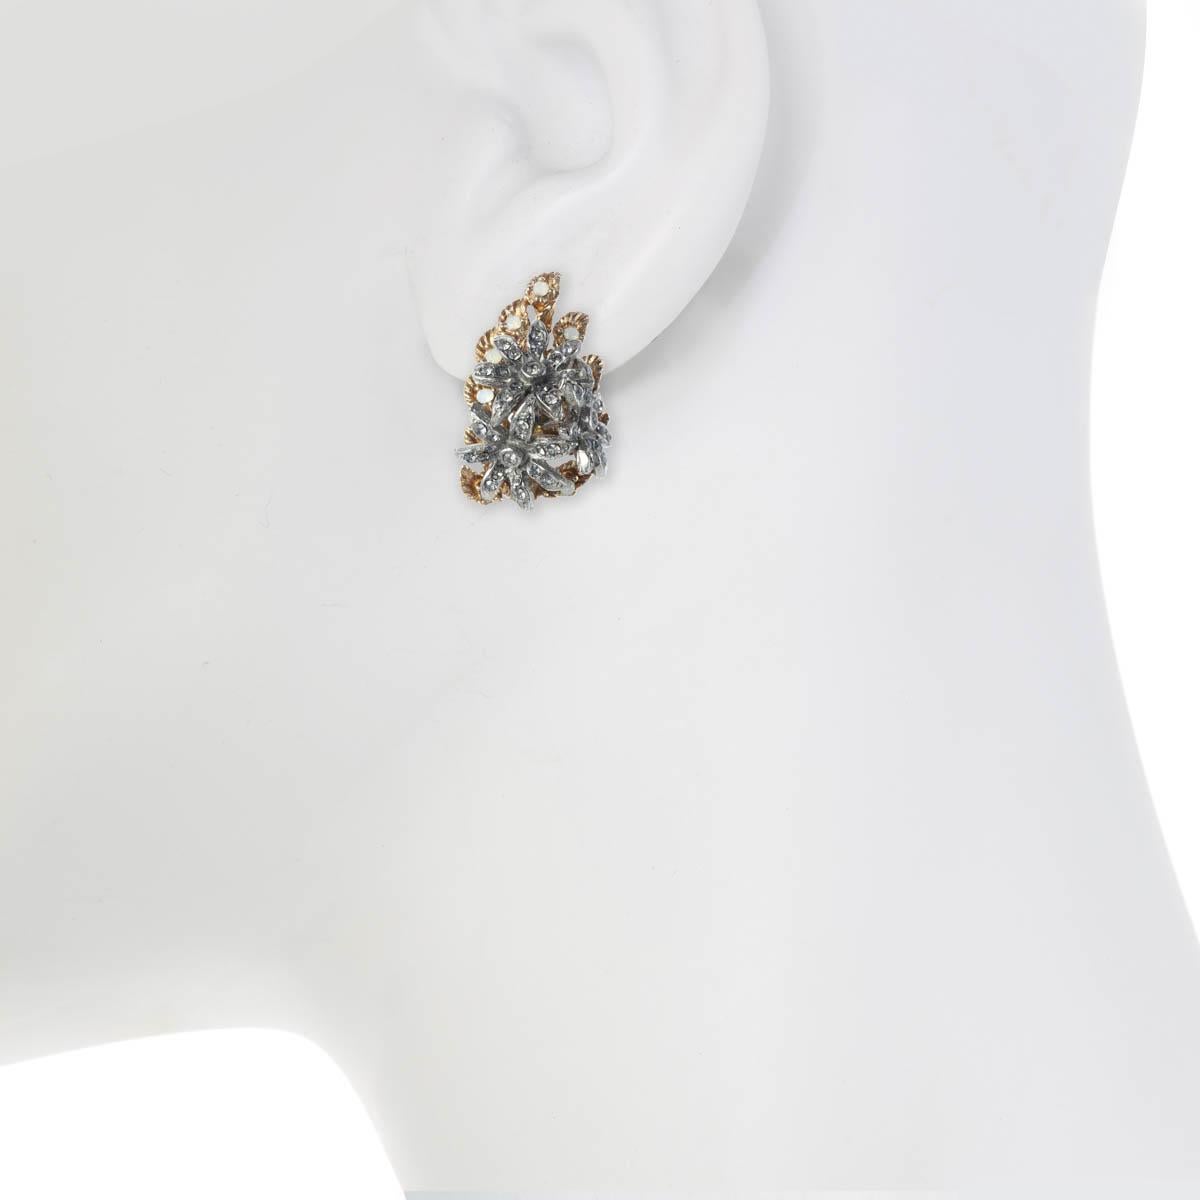 The perfect accessory for everyday wear, The Flower Cluster Earring, from season I of the Ines x Ciner collaboration, is quite stunning.

Materials:
Pewter
18K Gold Plating
Genuine Rhodium
Clip Back
Dimensions: 
Length: 1